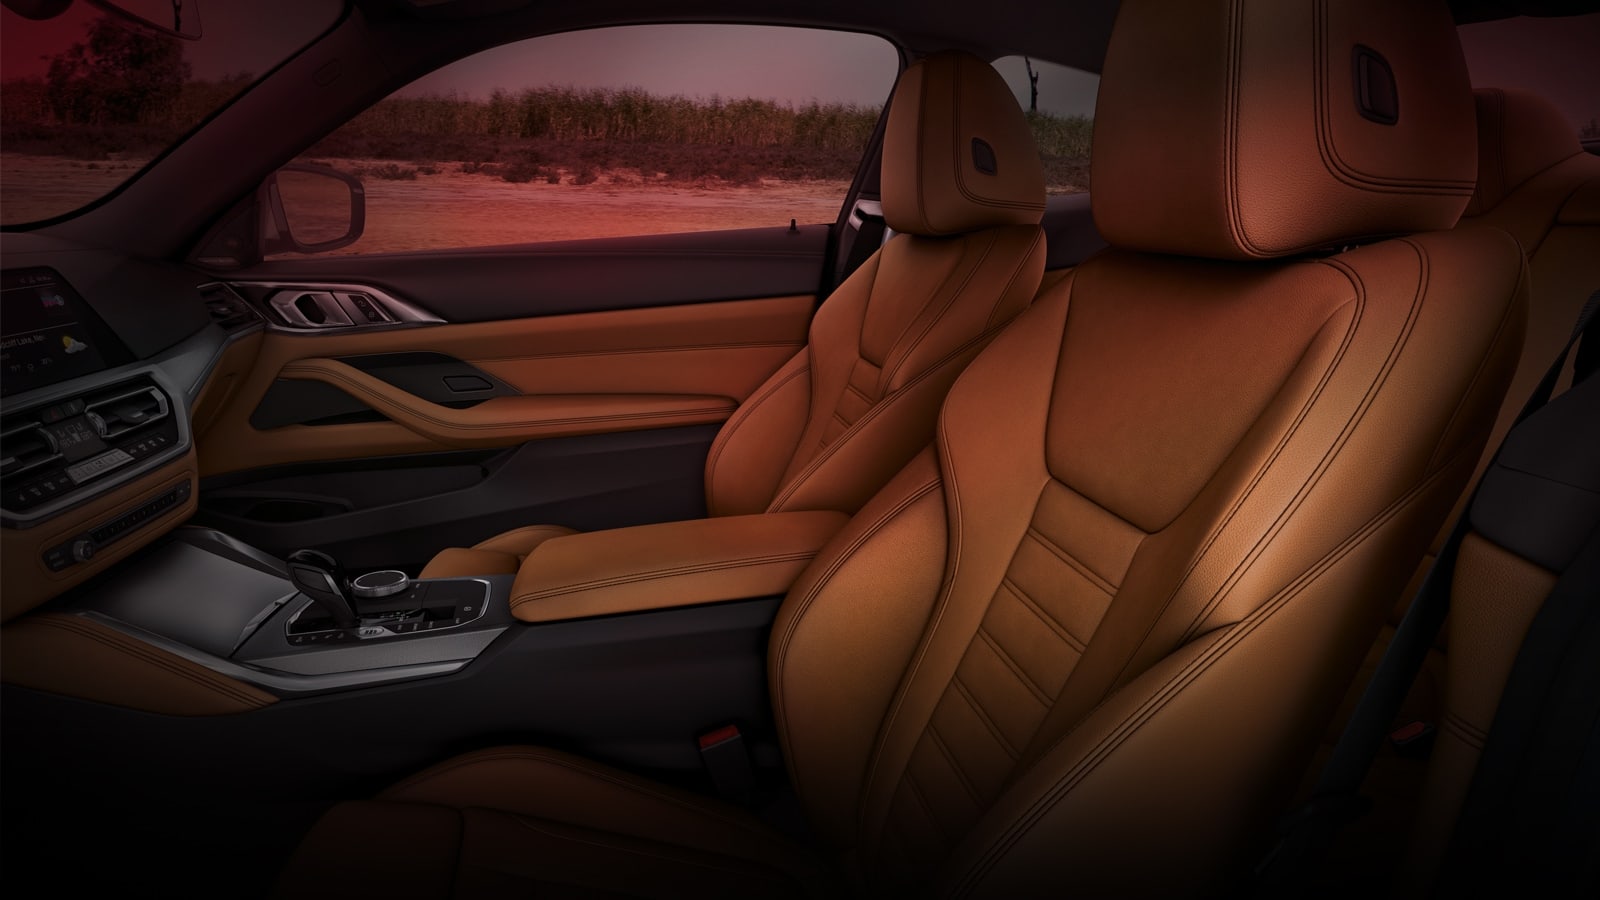 Front Sport Seats in the 2021 BMW 4 Series Coupe provide an optimal level of support and comfort for dynamic driving.